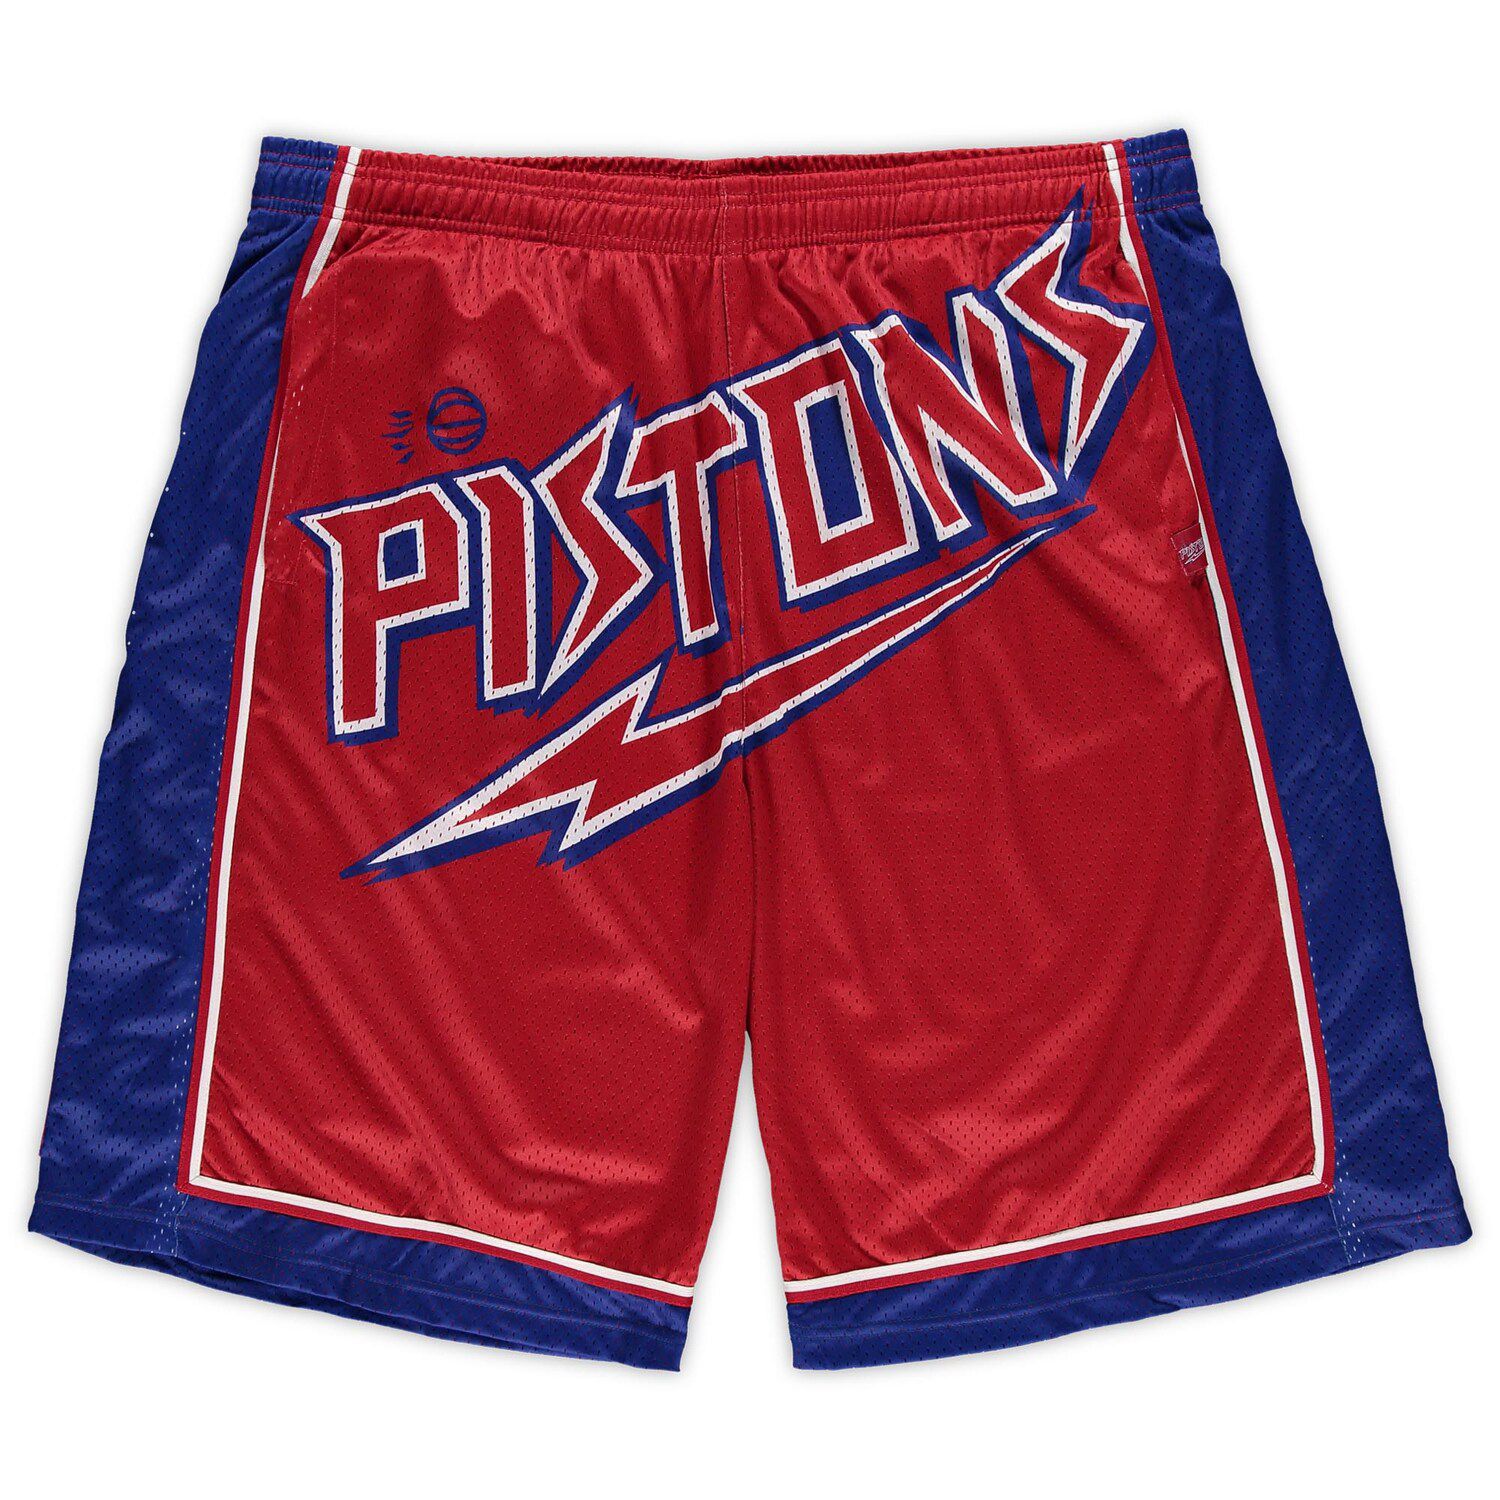 Image for Unbranded Men's Mitchell & Ness Red Detroit Pistons Big & Tall Hardwood Classics Big Face 2.0 Shorts at Kohl's.